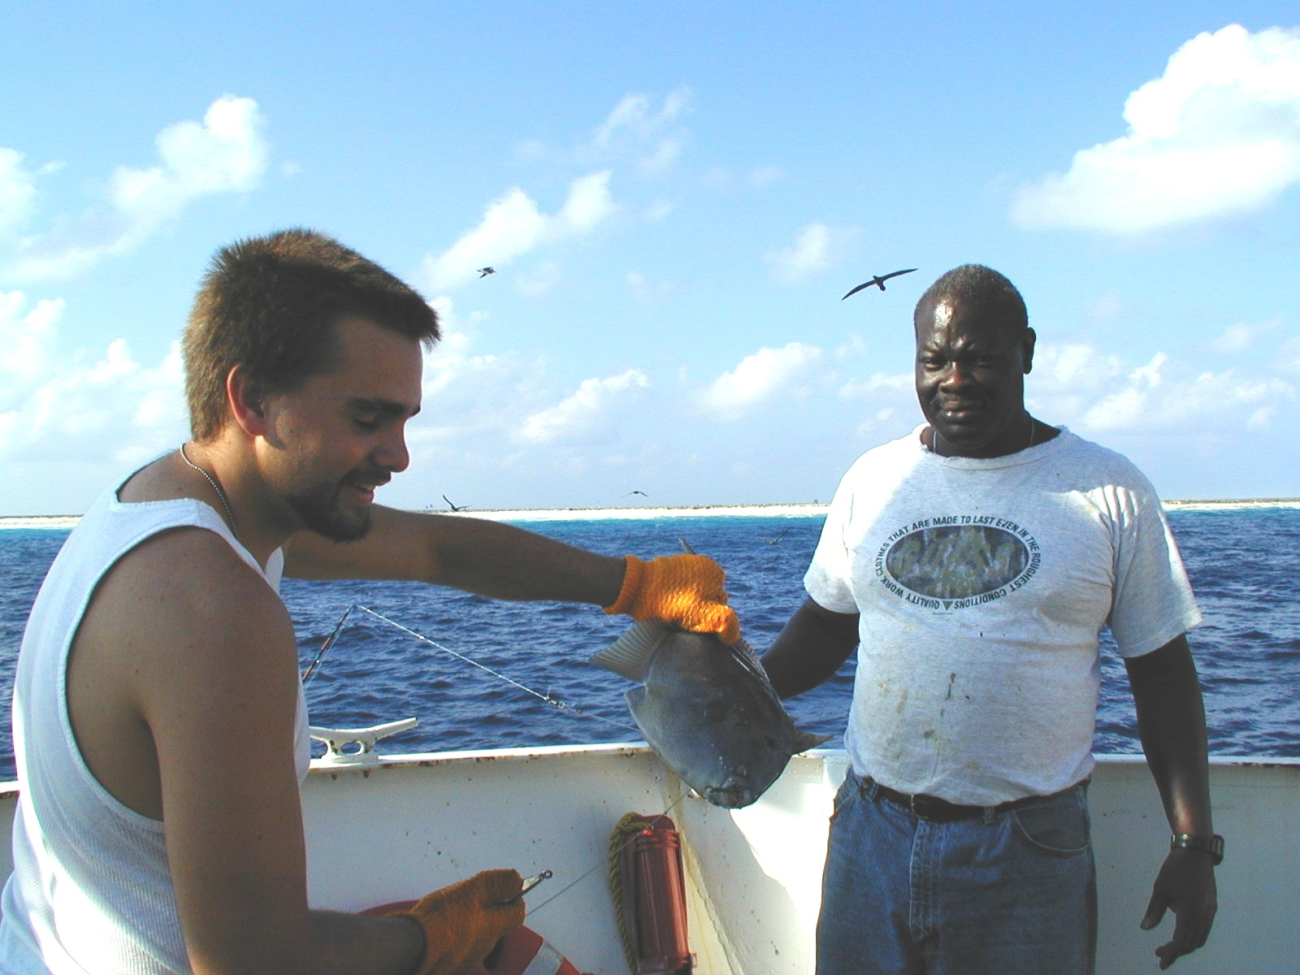 Deck hand Mike Theberge and seaman surveyor Leroy Johnson with fishcaught off Clipperton Island during STAR 2000